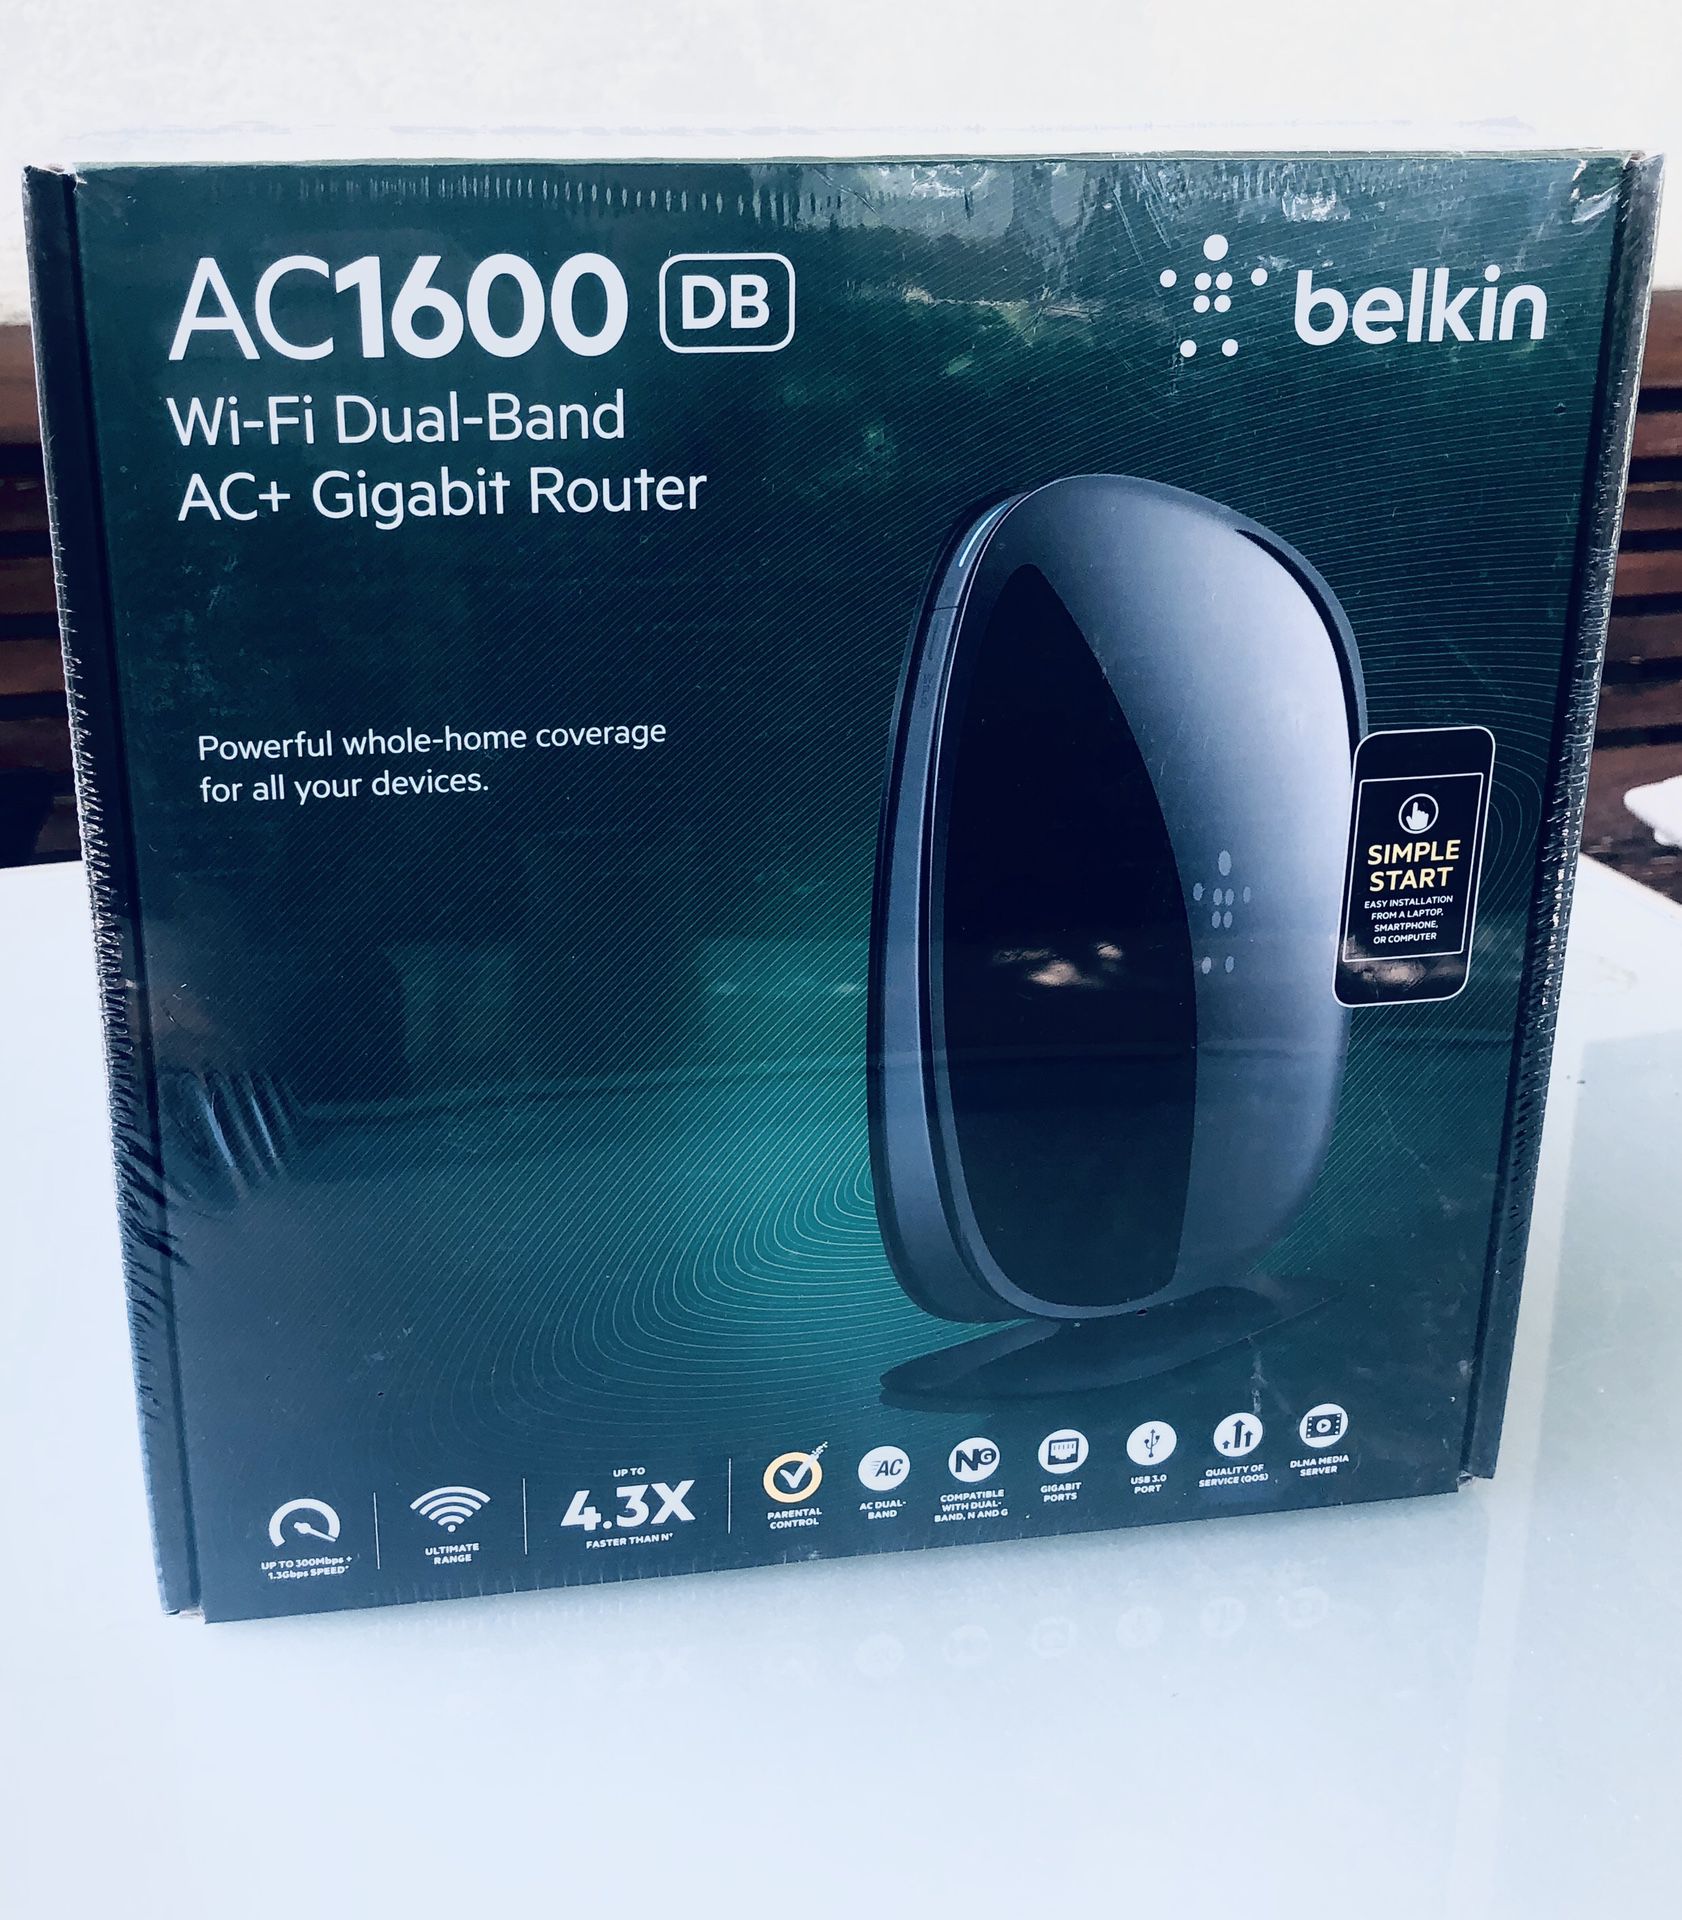 WiFi Dual band Internet Router Belkin - AC1600 BRAND NEW!